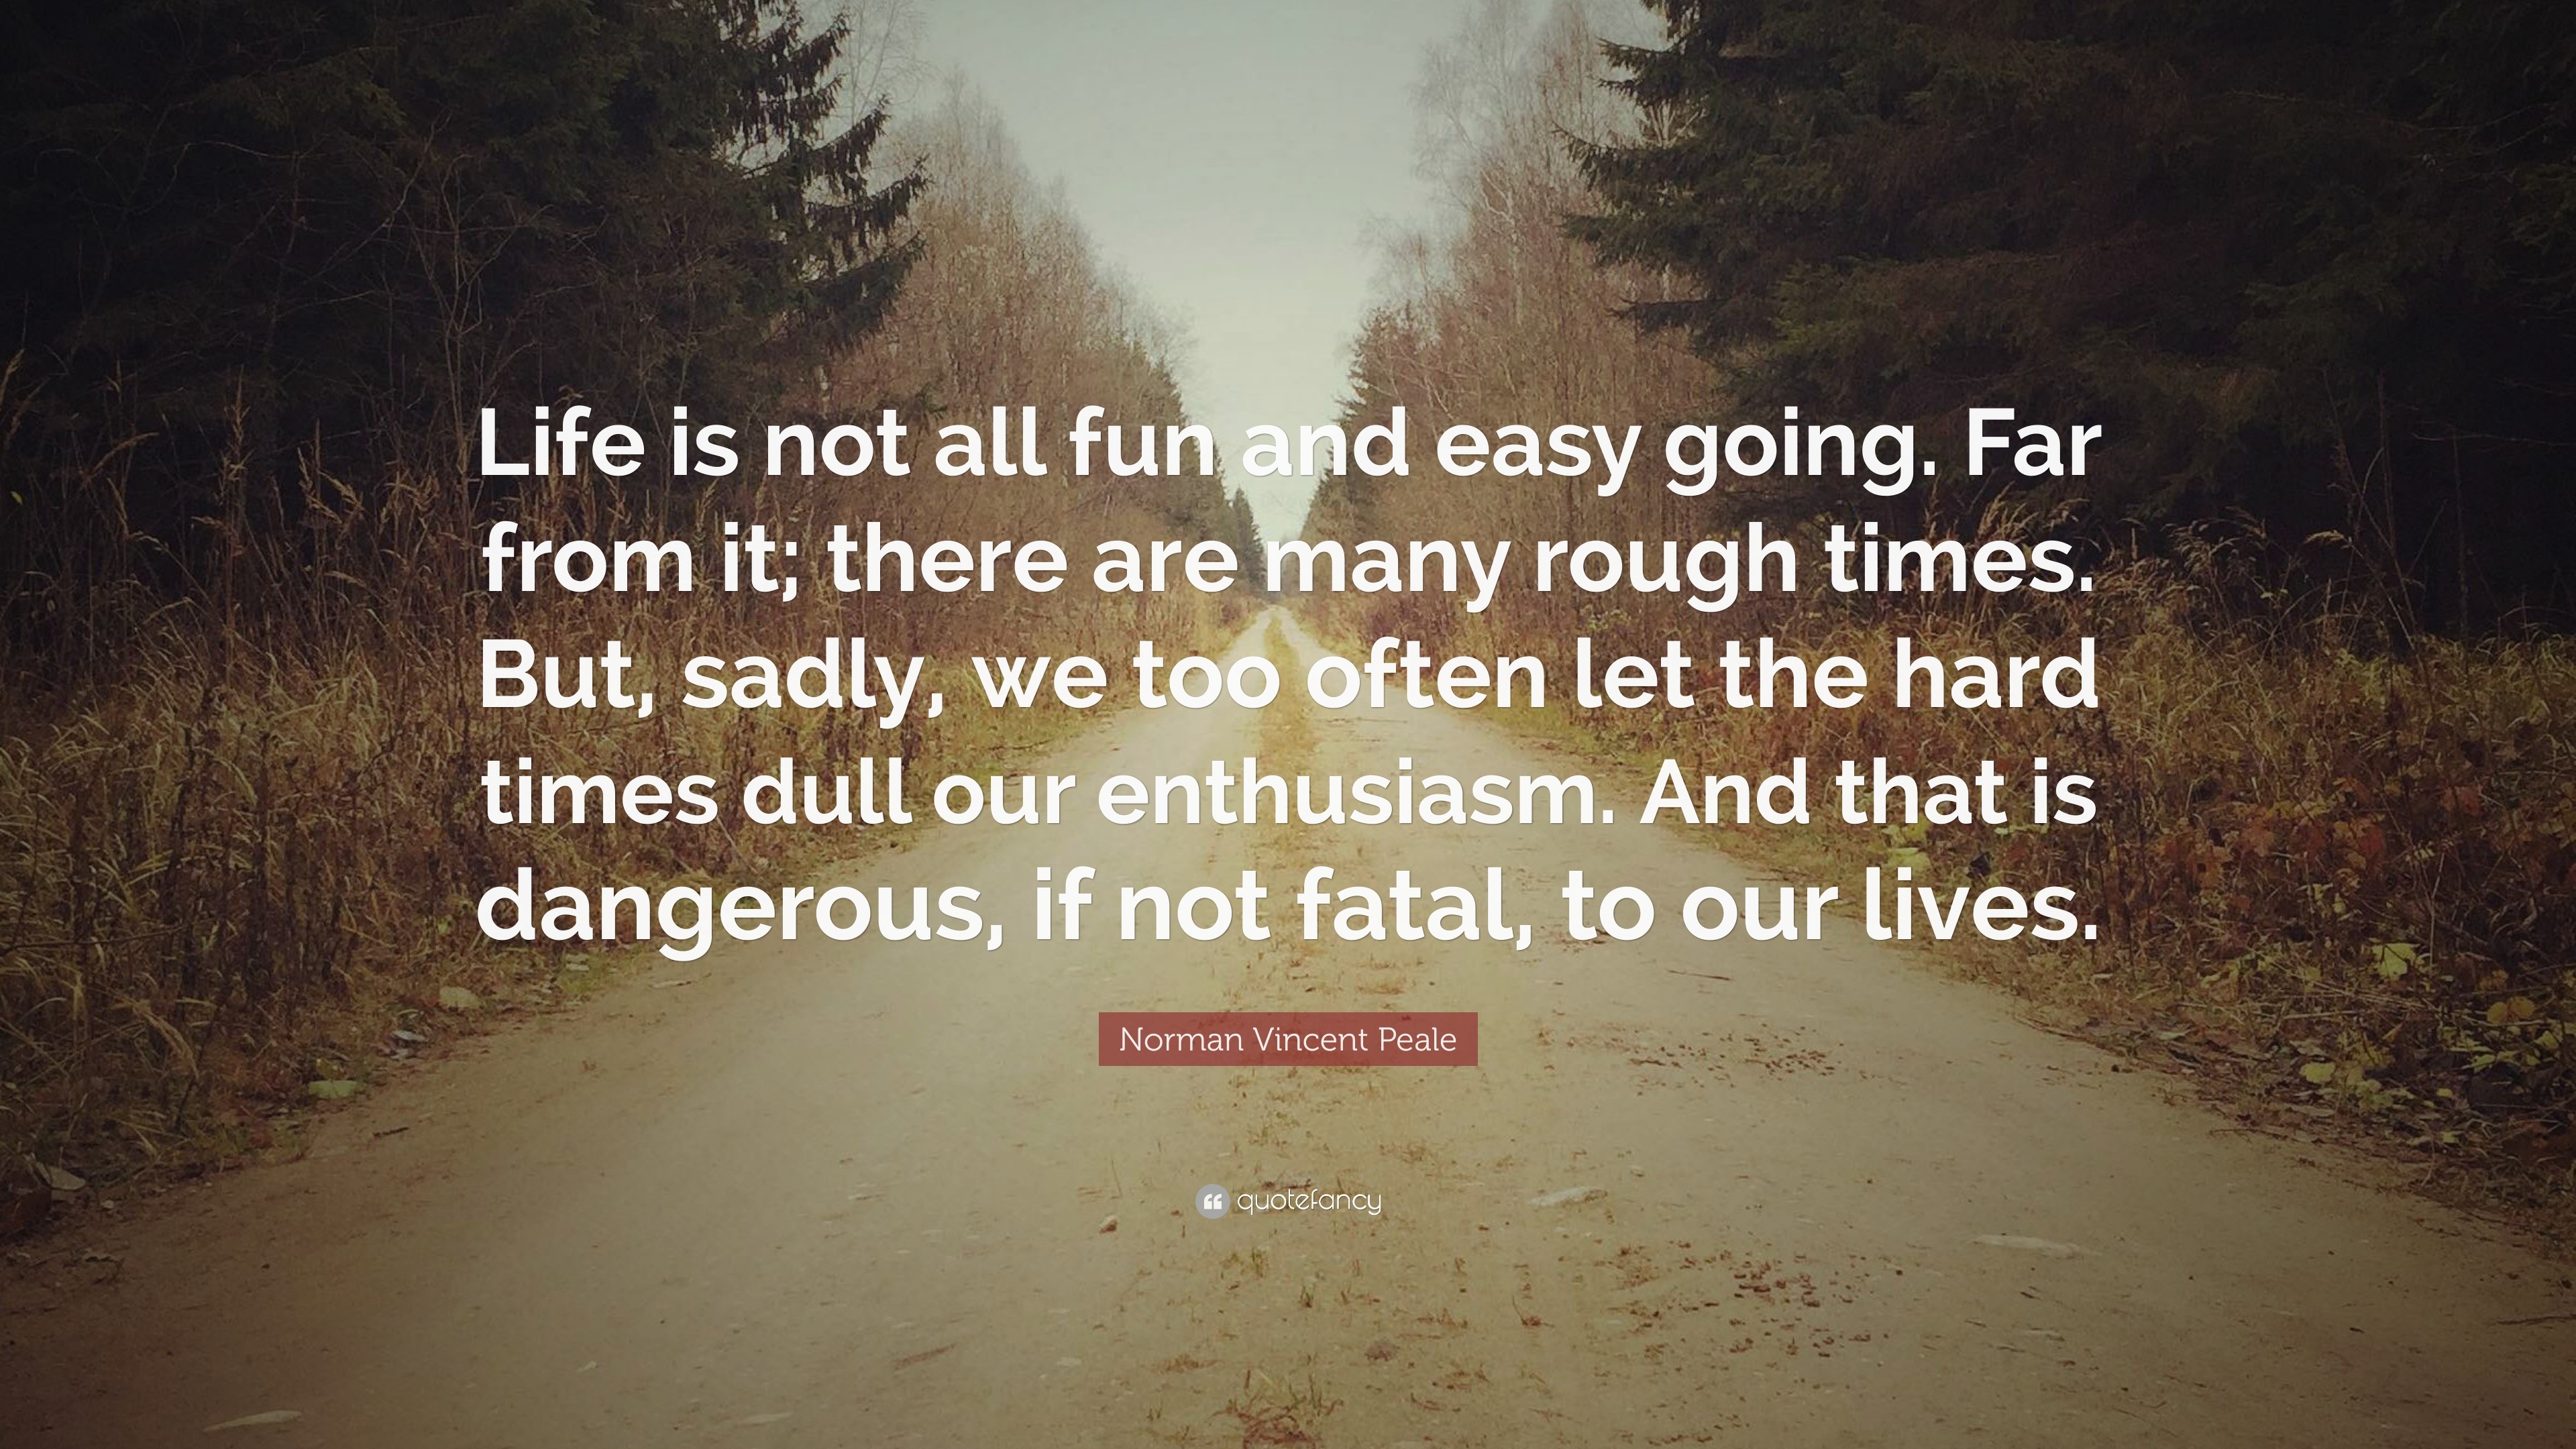 Norman Vincent Peale Quote: "Life is not all fun and easy ...